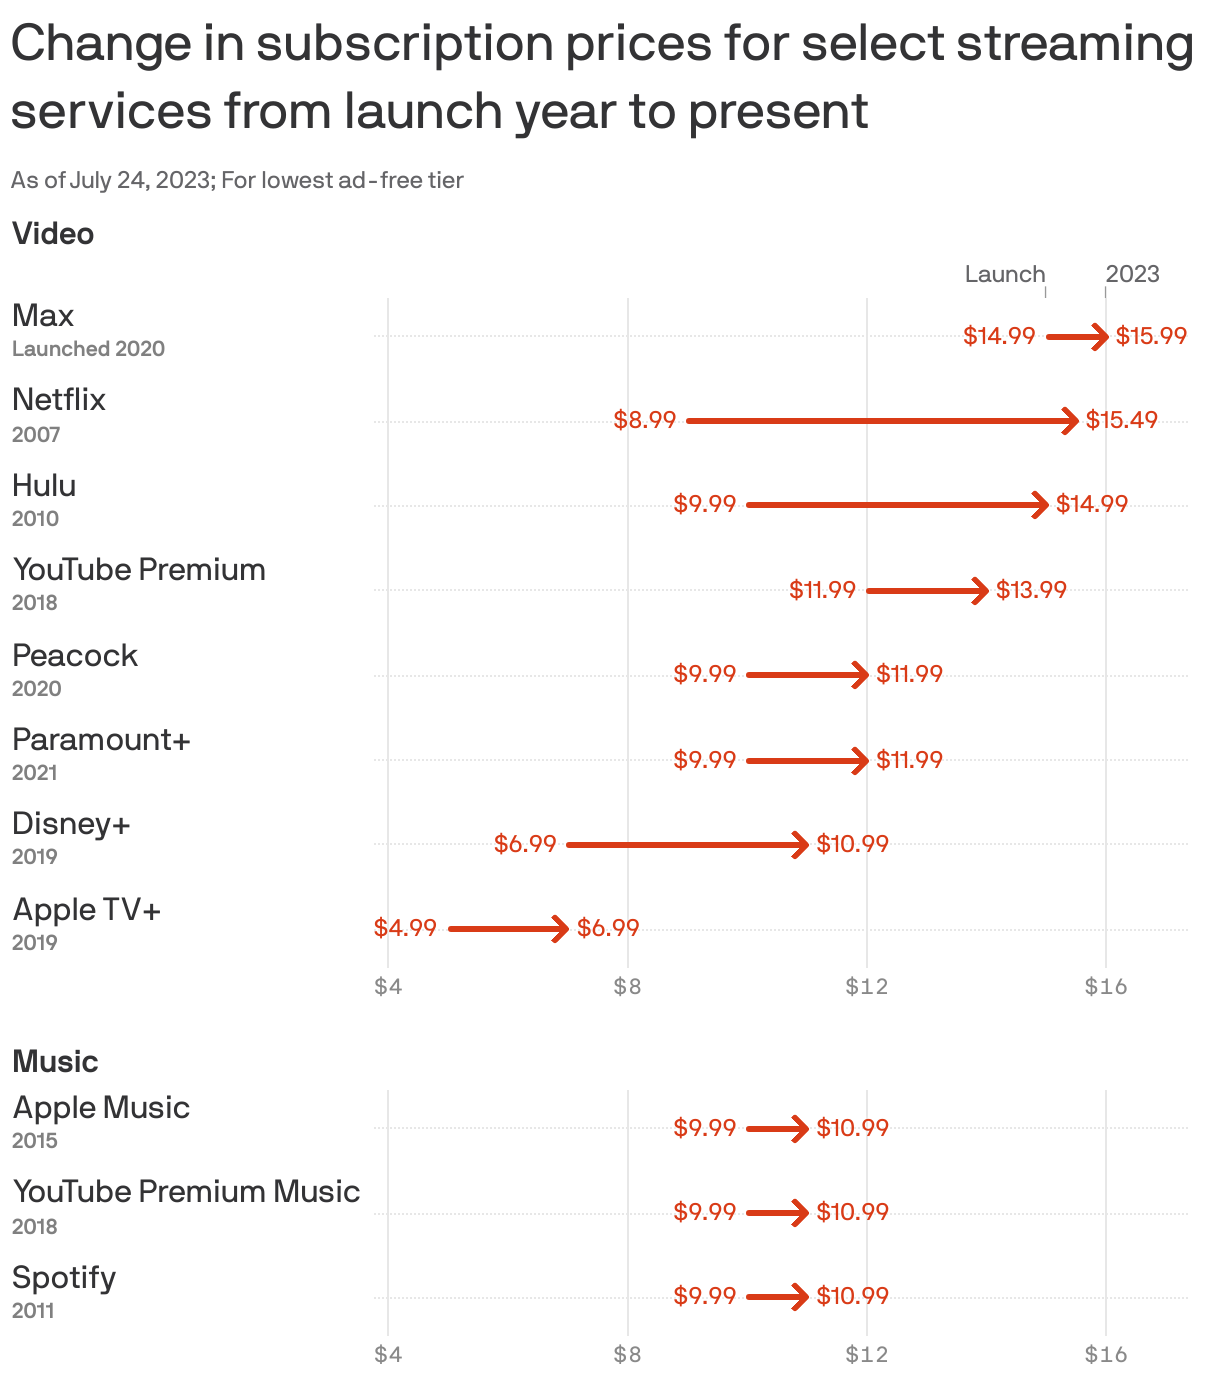 Change in subscription prices for select streaming services from launch year to present